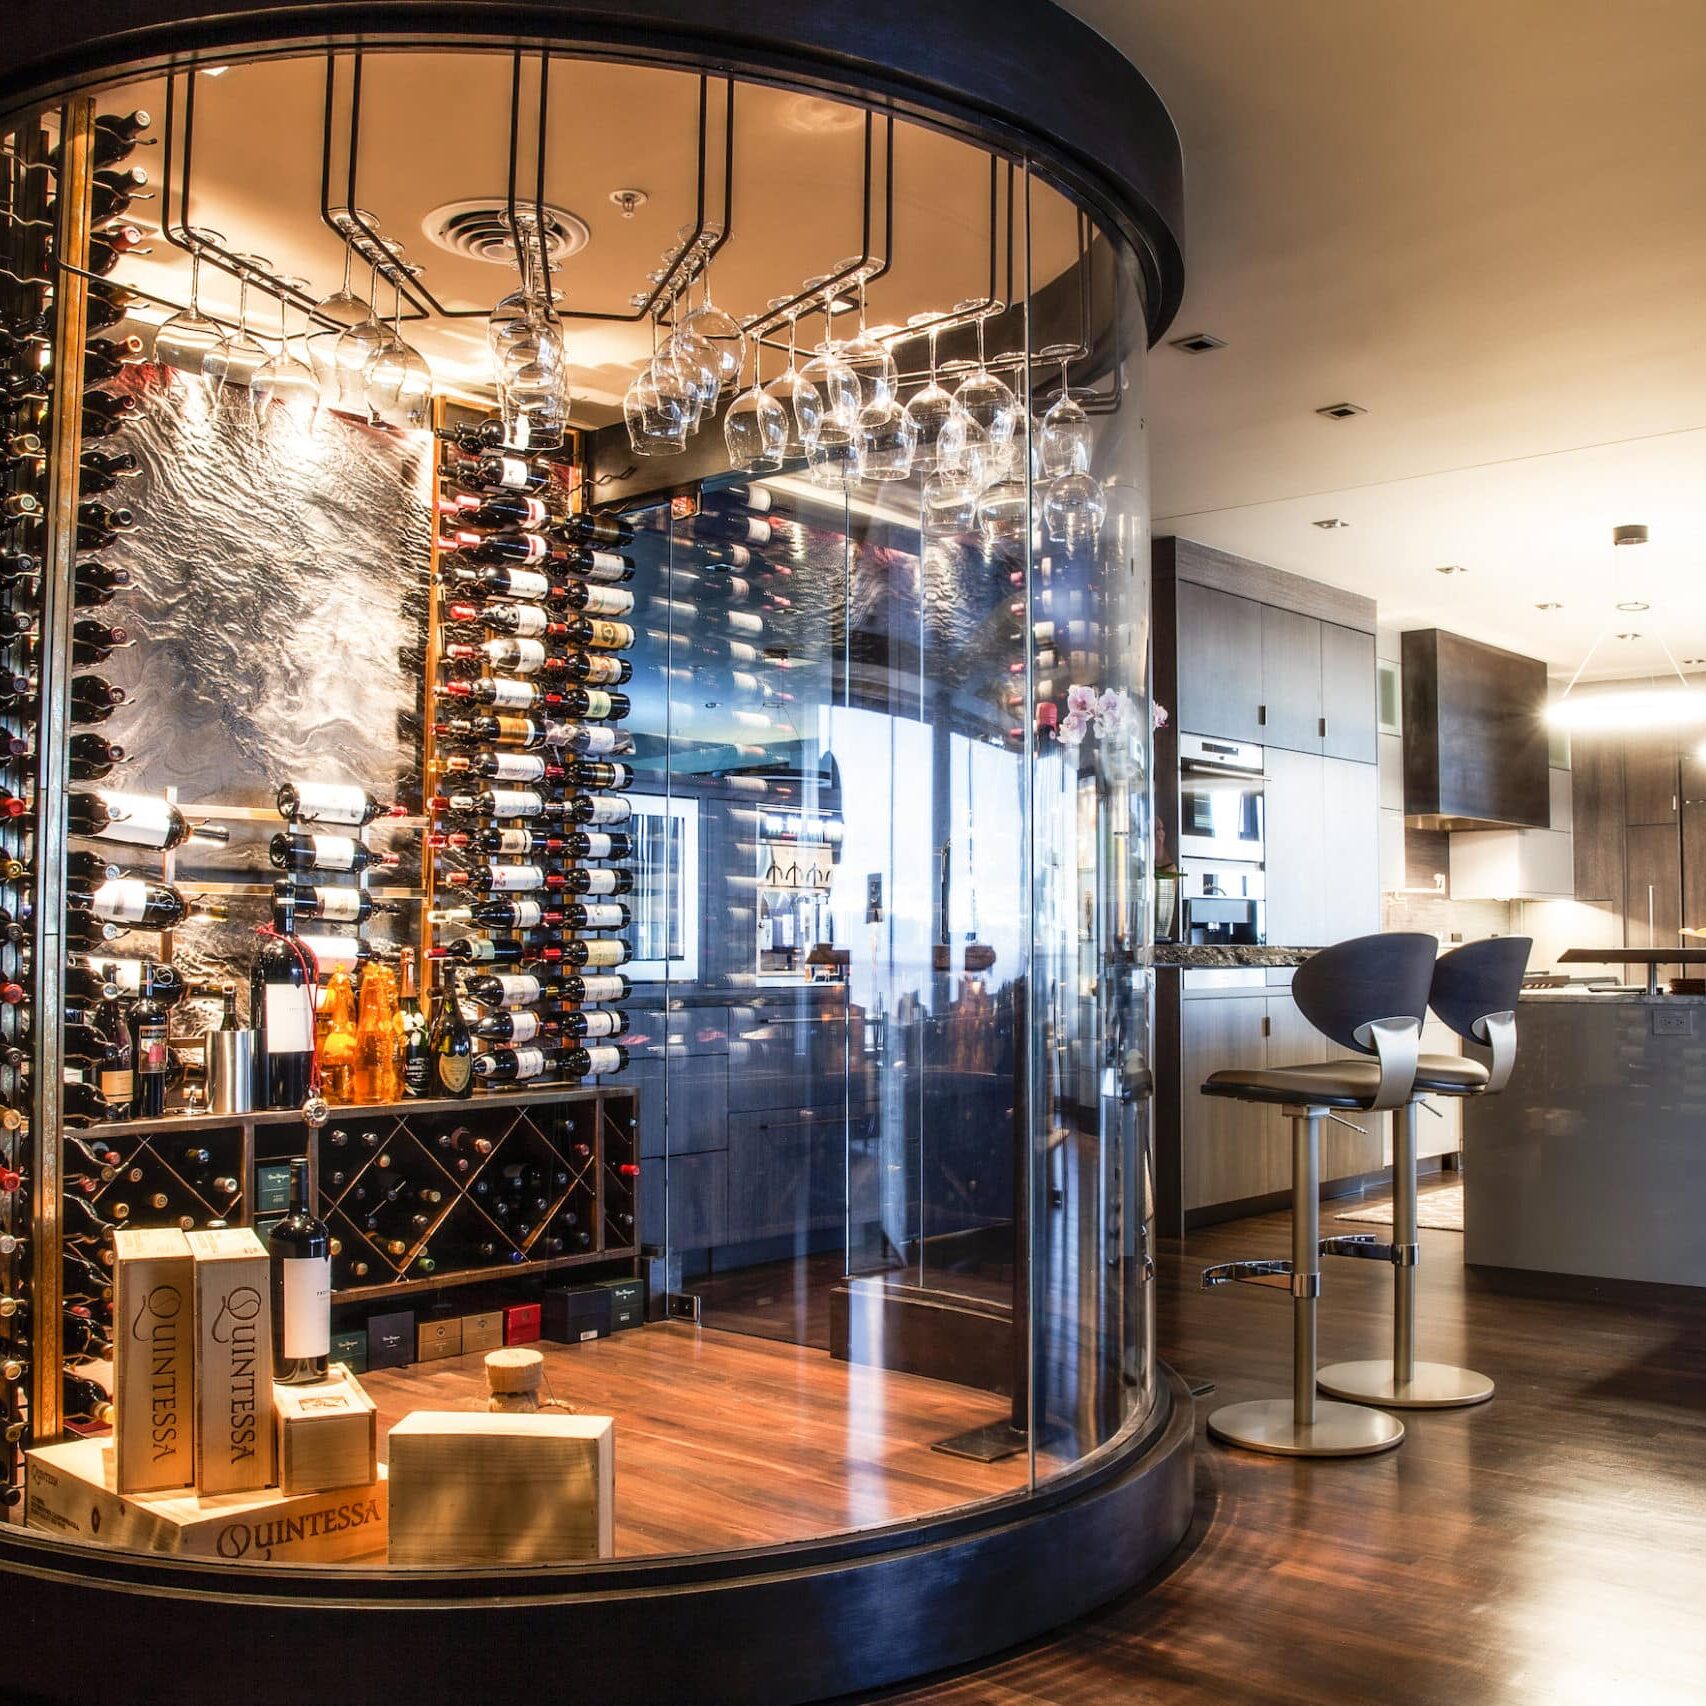 This custom wine cellar exceeds even the expectations of any Four Seasons Private Residence. It mixes three-deep, three-foot Wall Series racks, Big Bottle, and Magnum racks. The W Series racks are connected using Frames and included hardware. We also designed the custom metal X-bins for bulk storage.